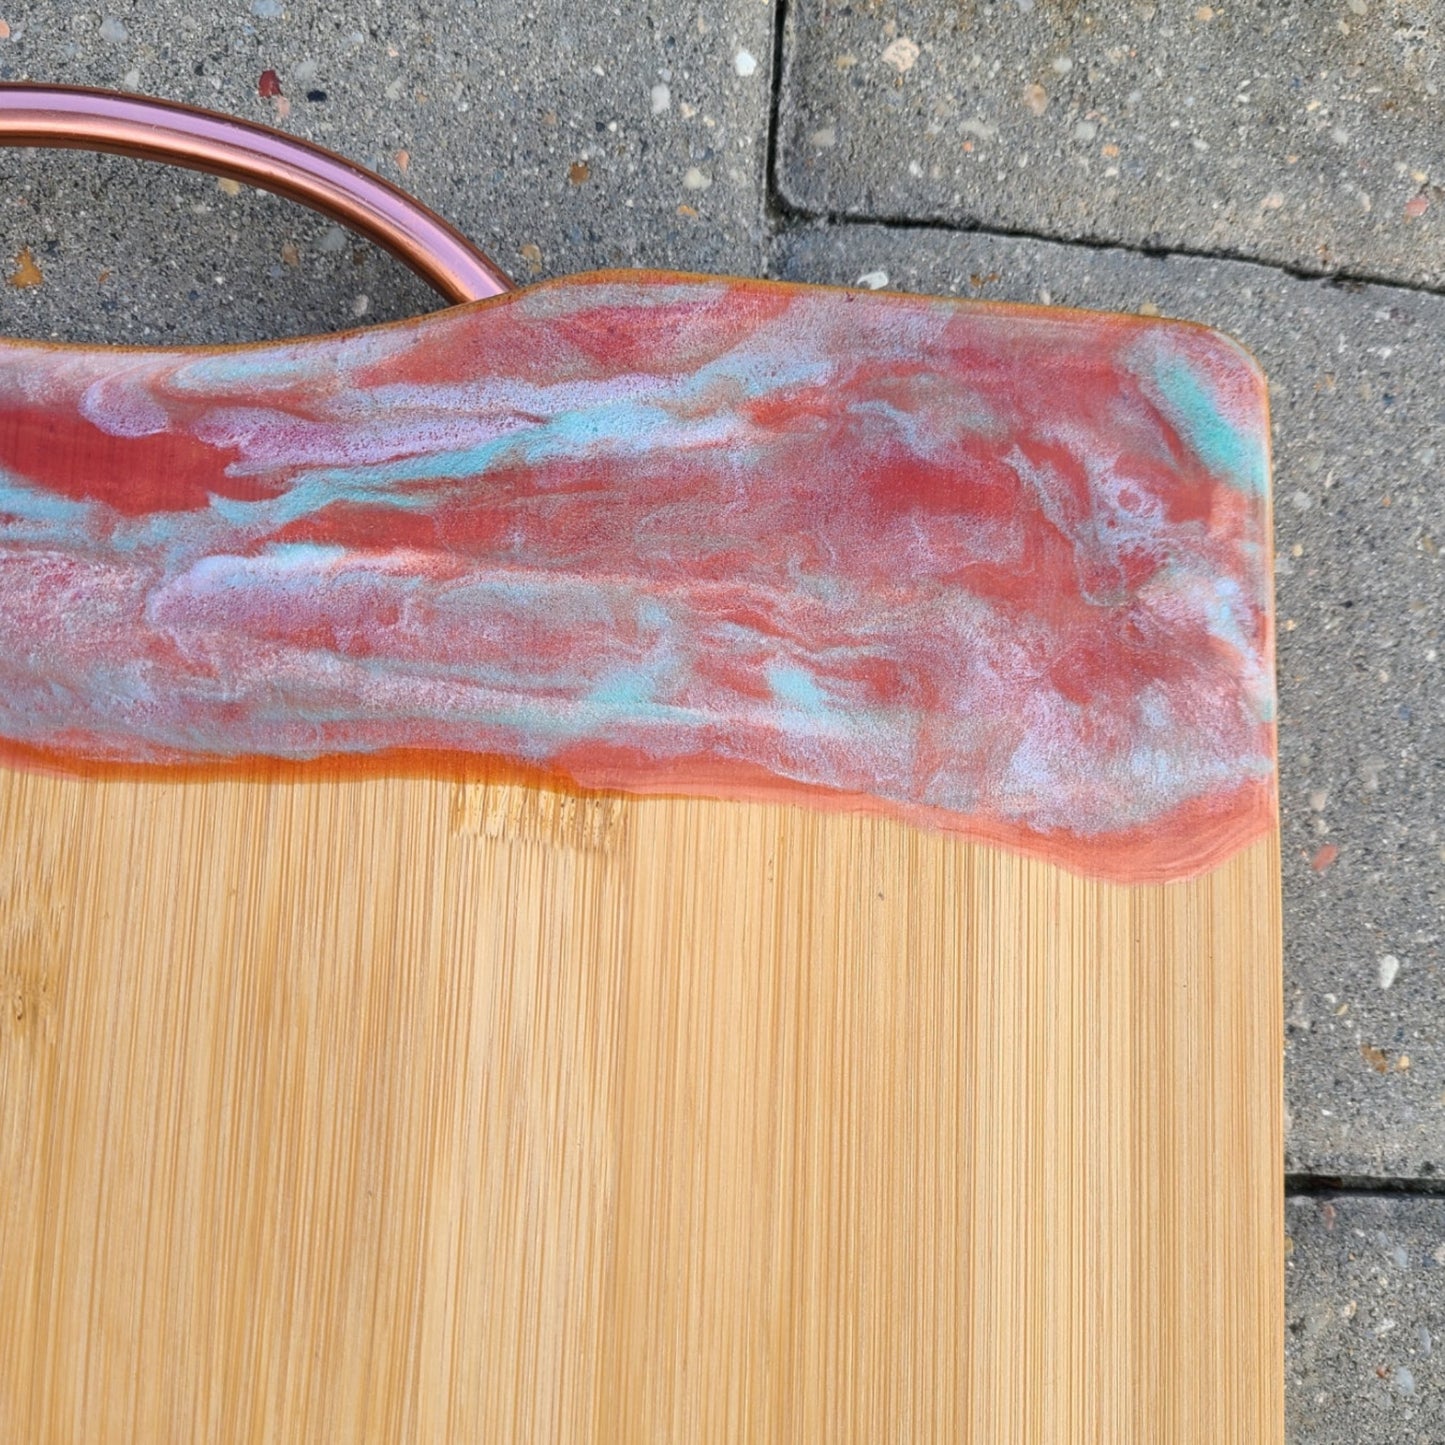 Bamboo Cutting Board With Copper Handle, Copper, Teal Resin